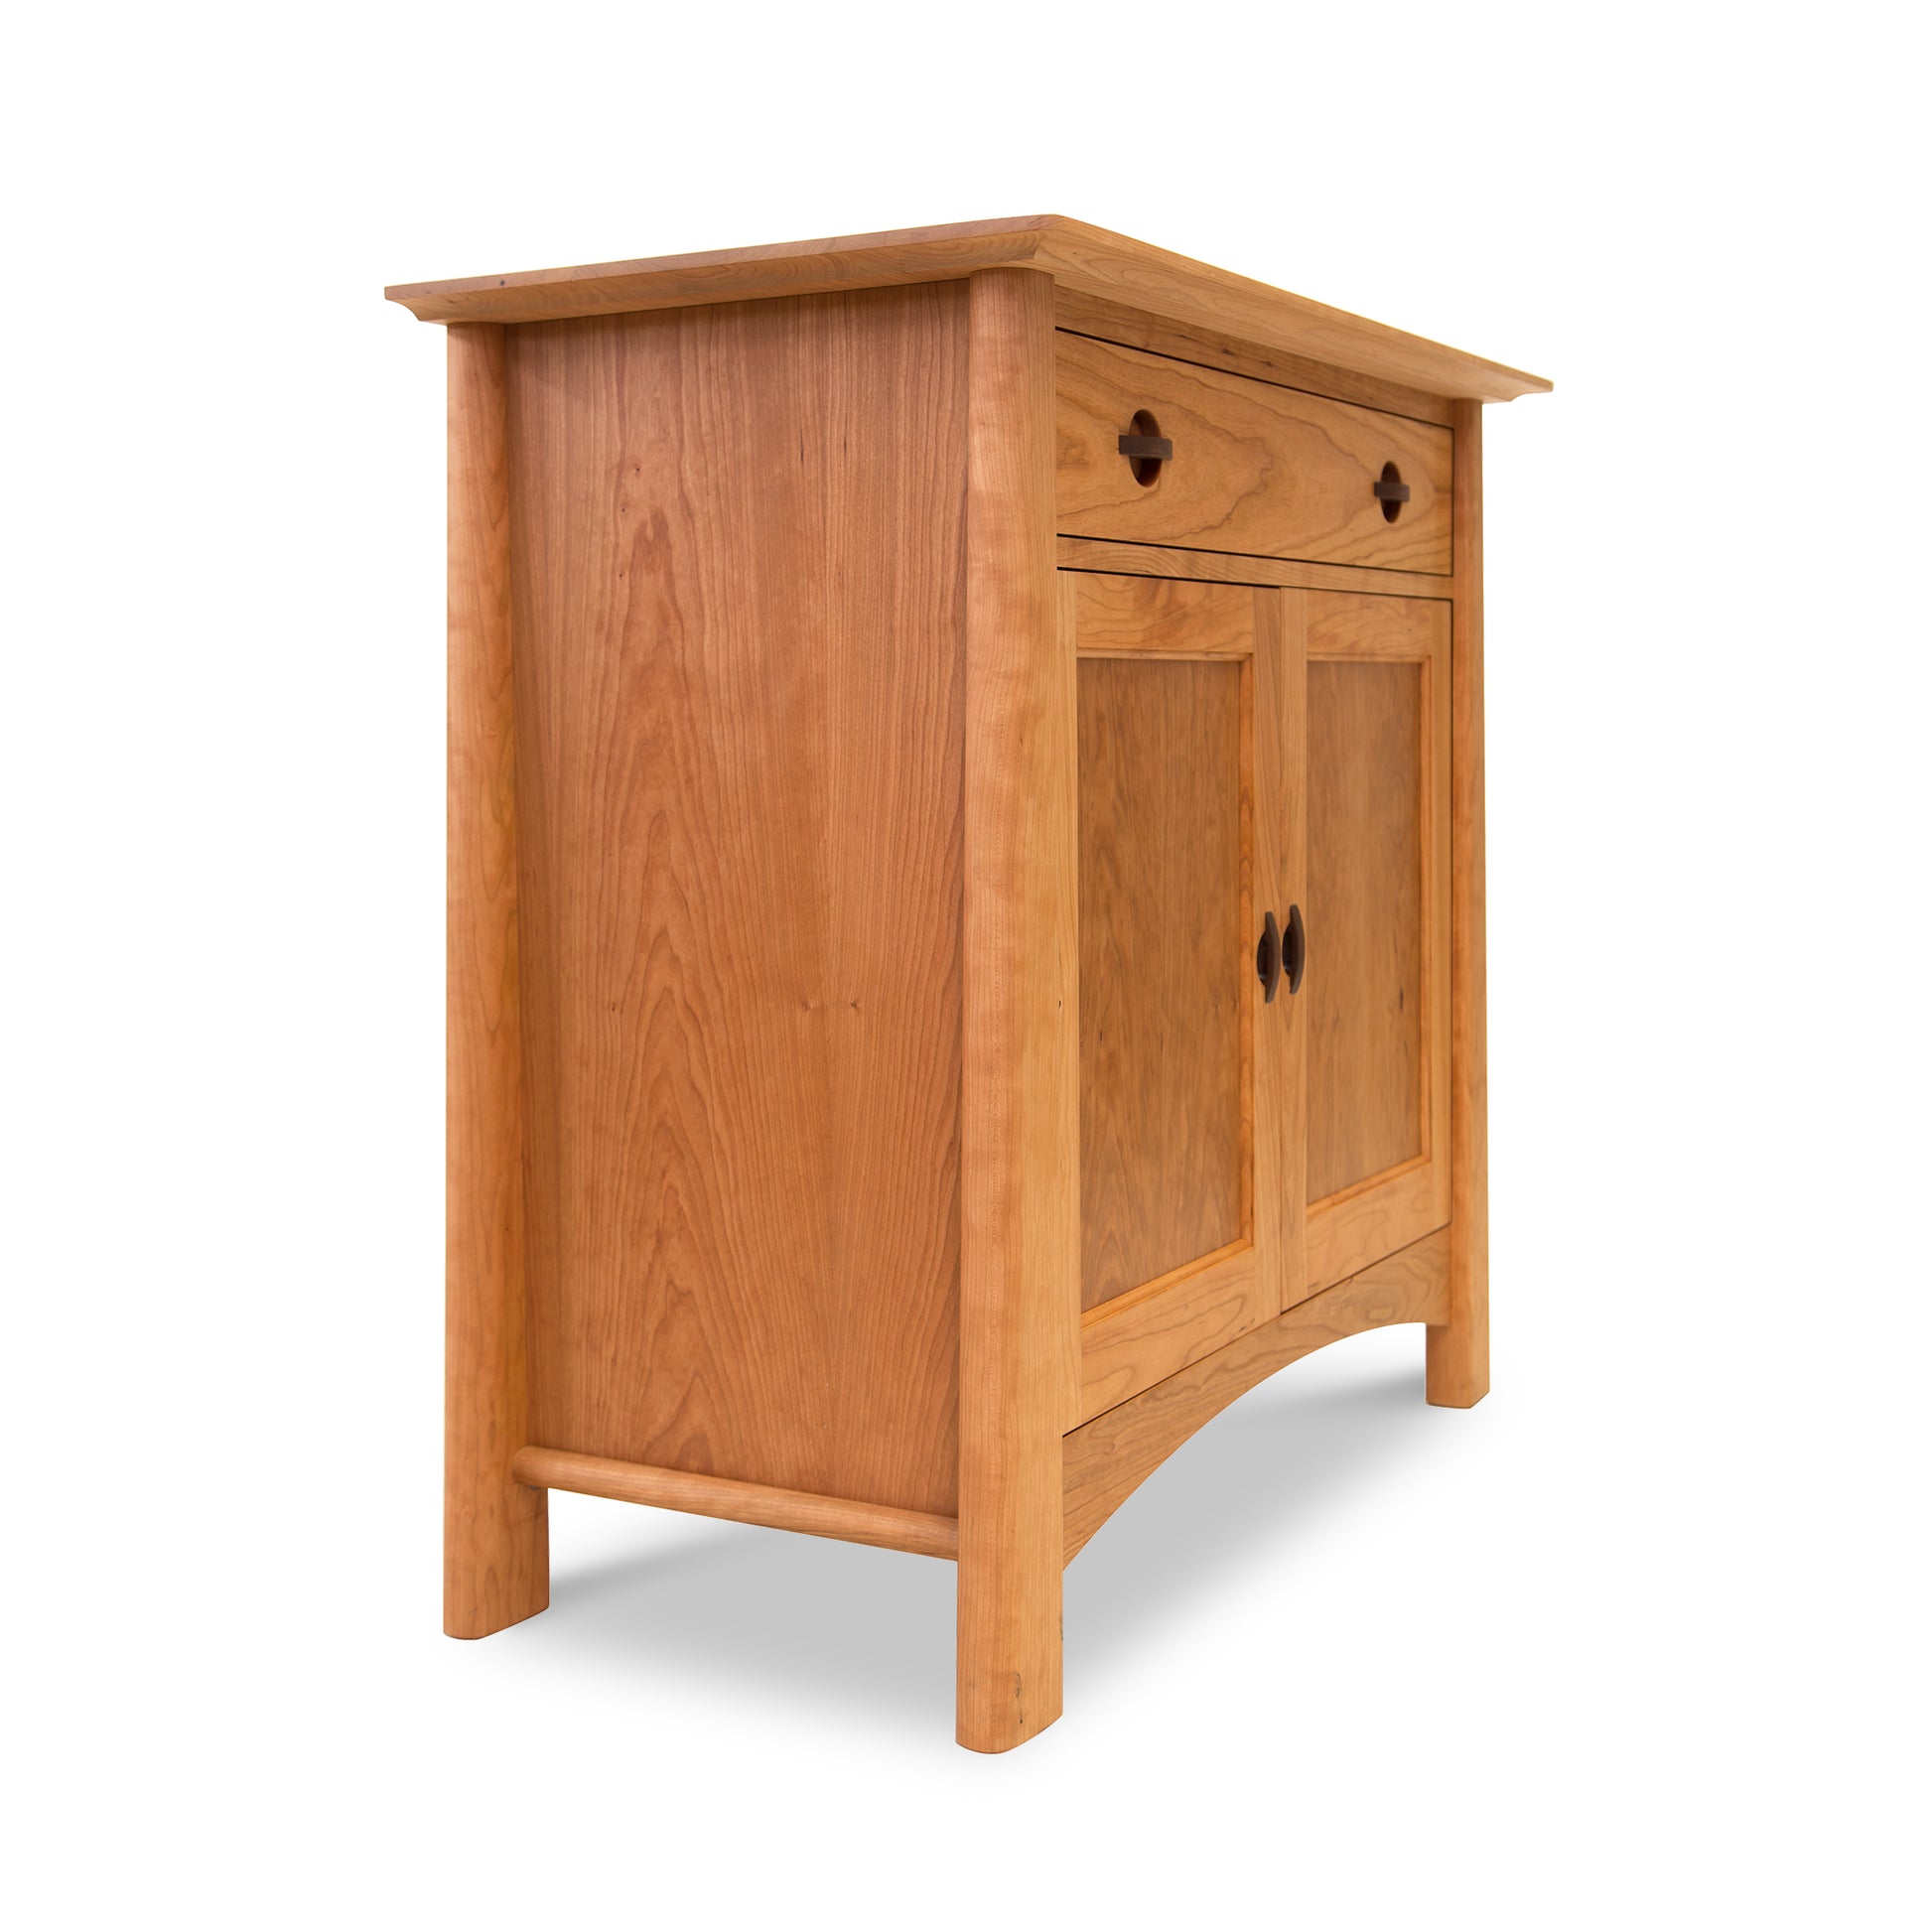 An eco-friendly Cherry Moon Small 38" Sideboard by Maple Corner Woodworks with two doors and two drawers, providing extra storage.